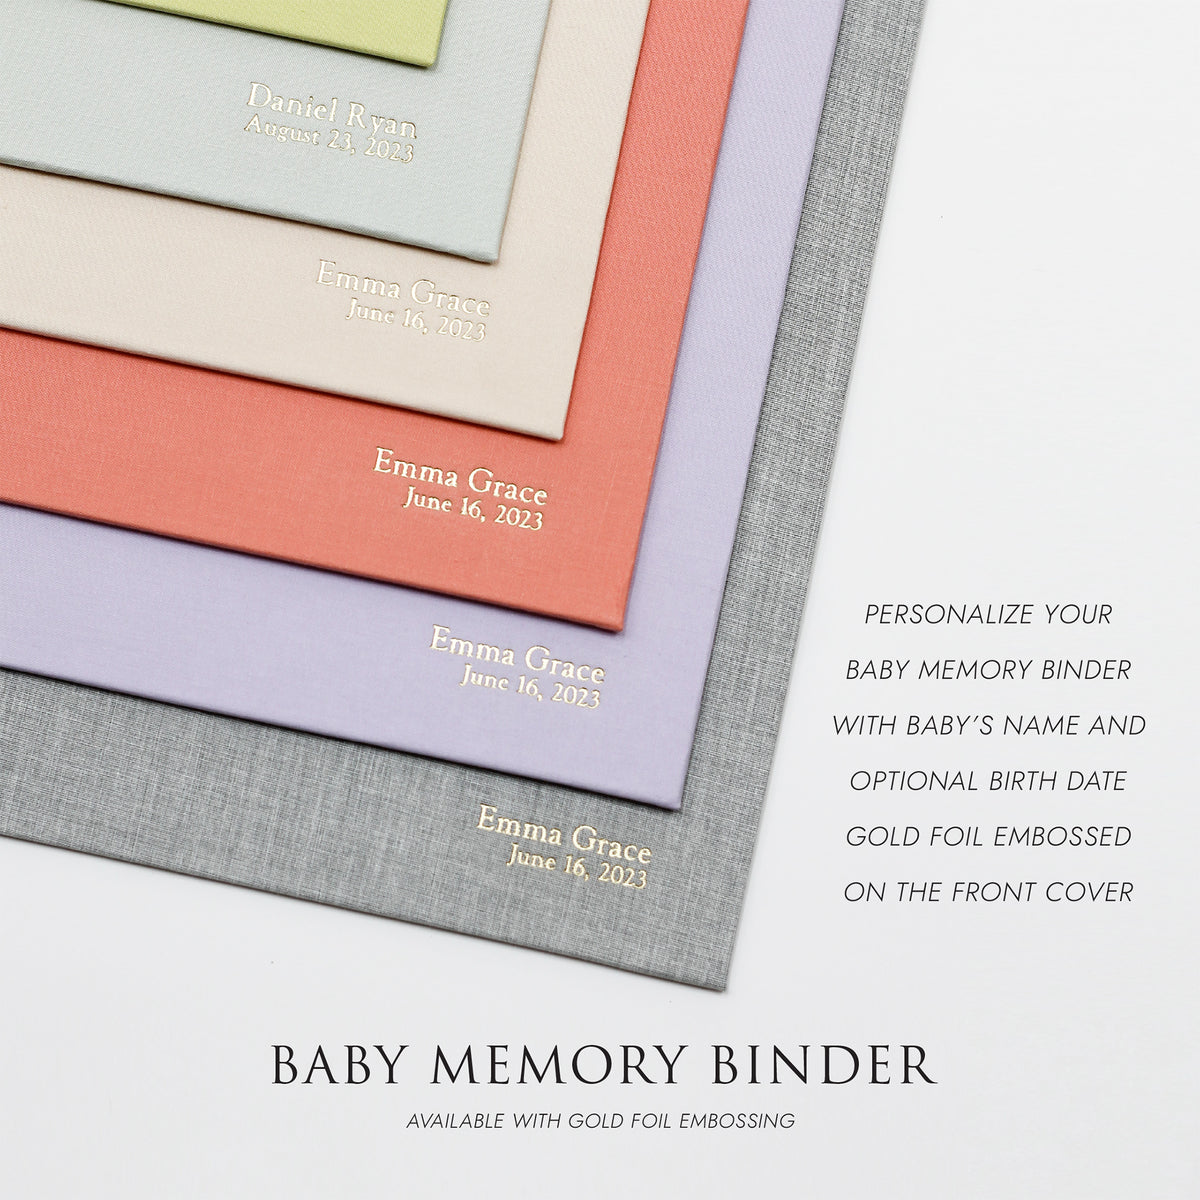 Personalized Baby Memory Binder with Jade Silk Cover | Select Your Own Pages